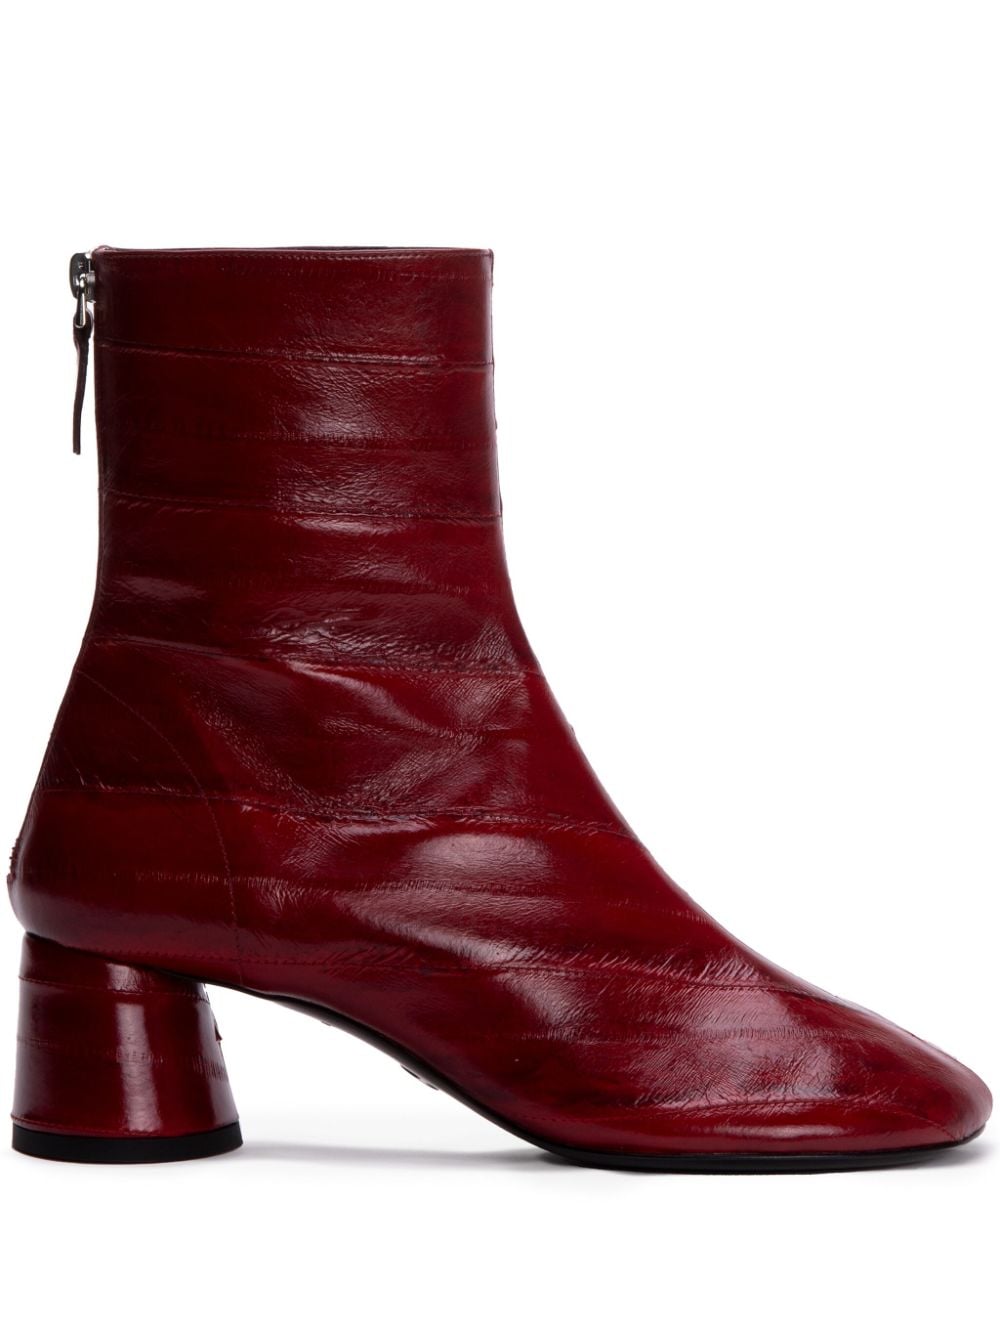 Proenza Schouler Glove leather boots Red